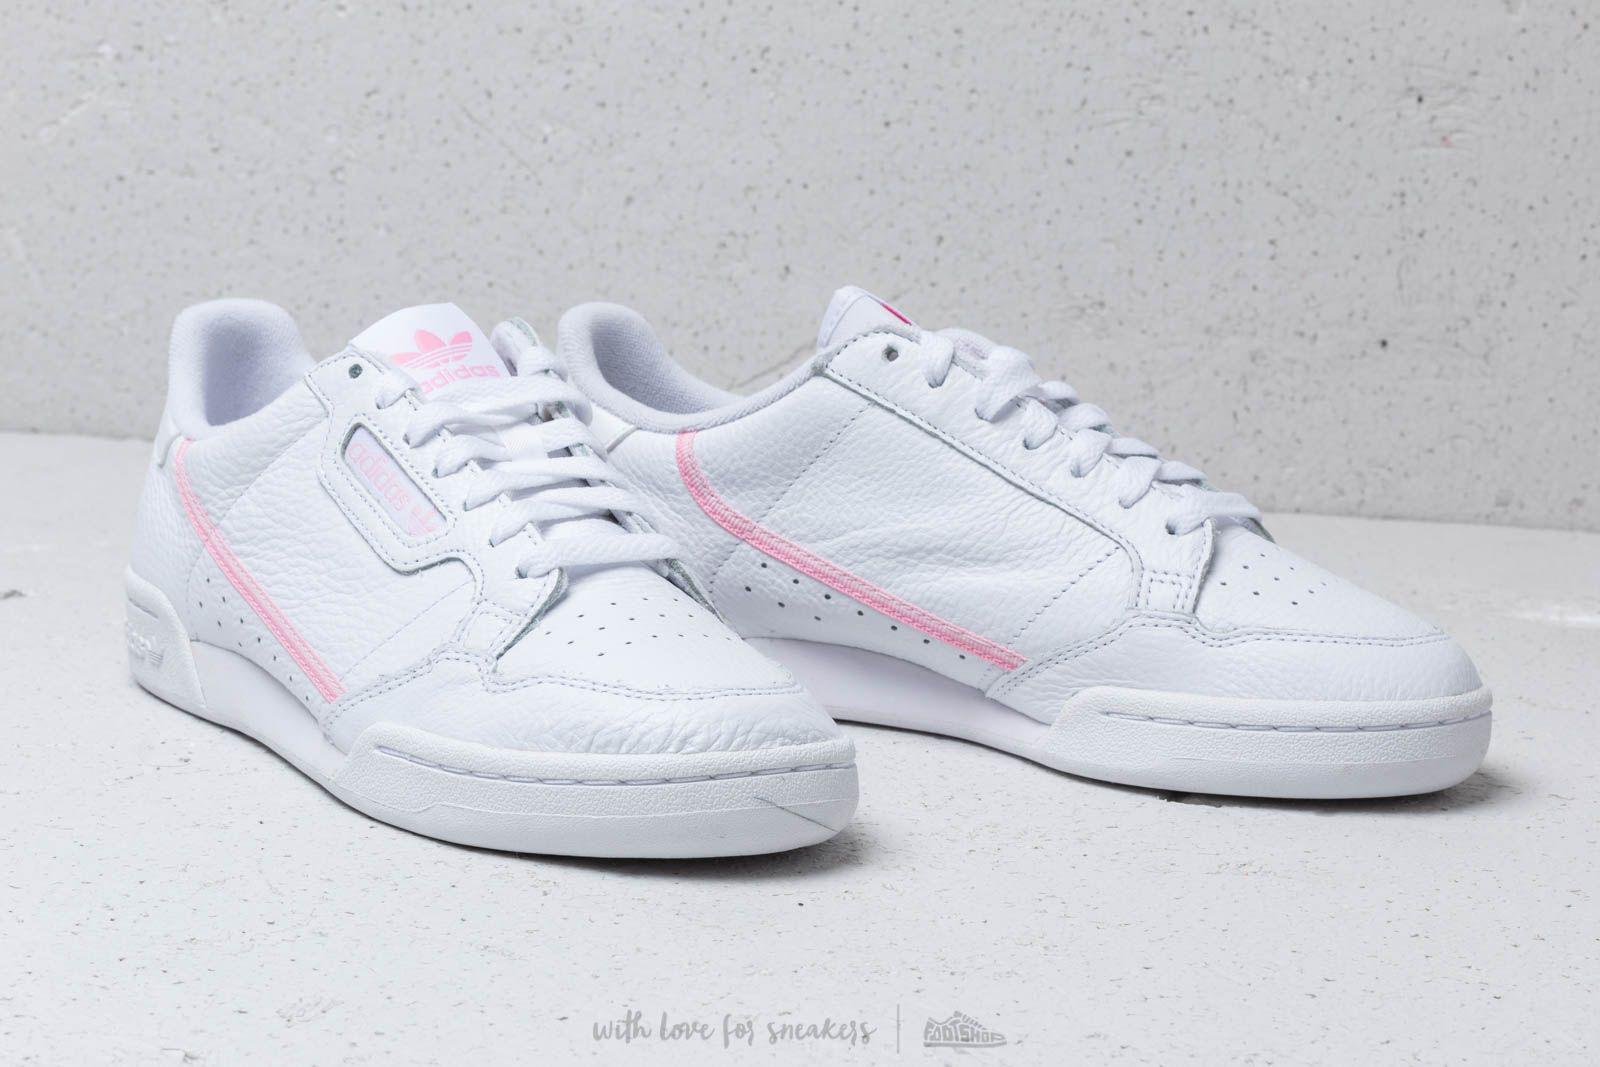 adidas originals white and pink continental 80 sneakers